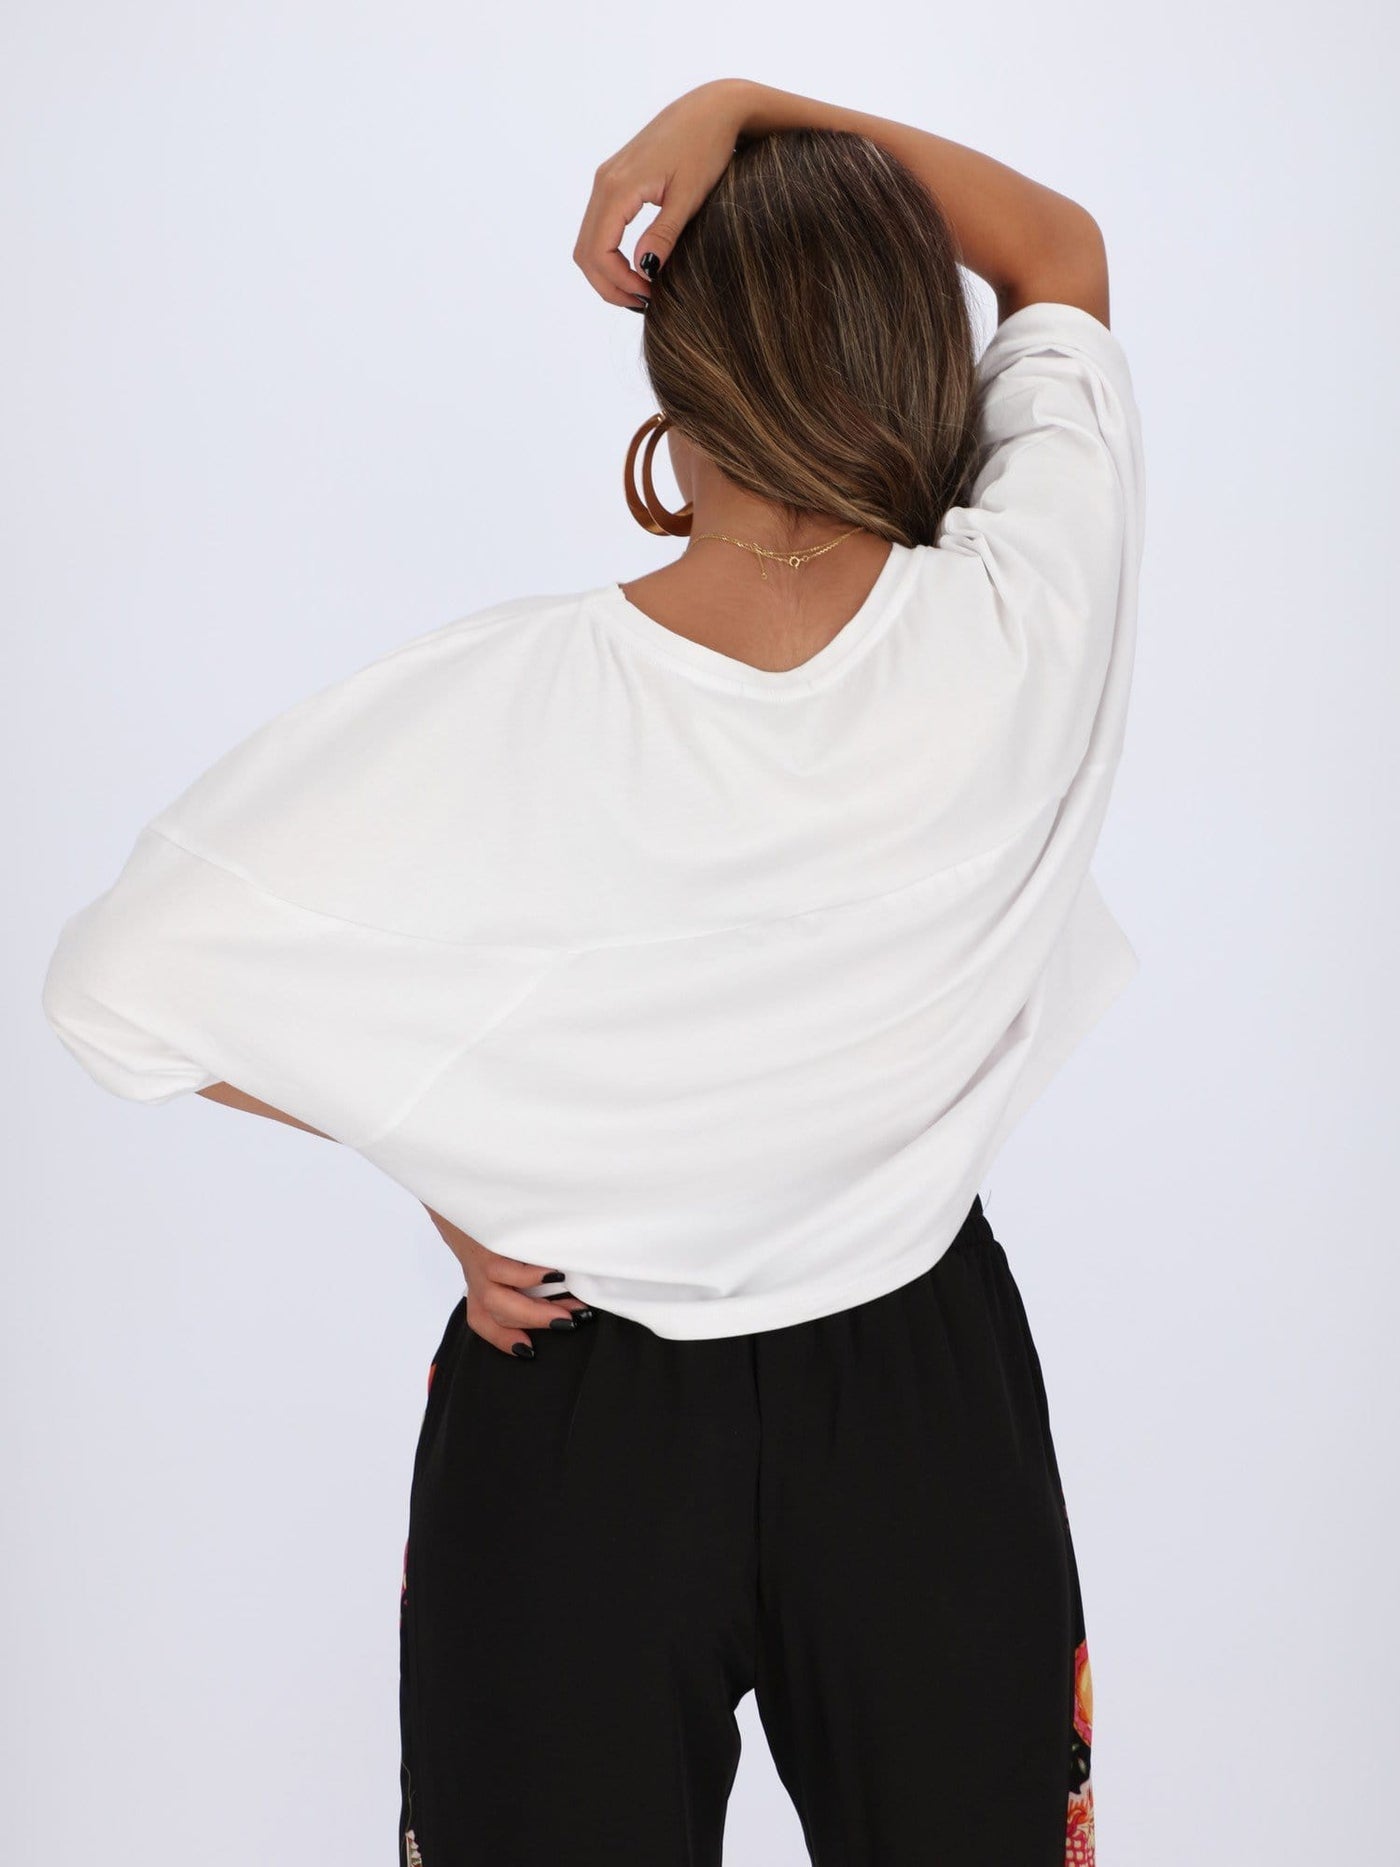 OR Tops & Blouses Batwing Sleeve Cropped Top